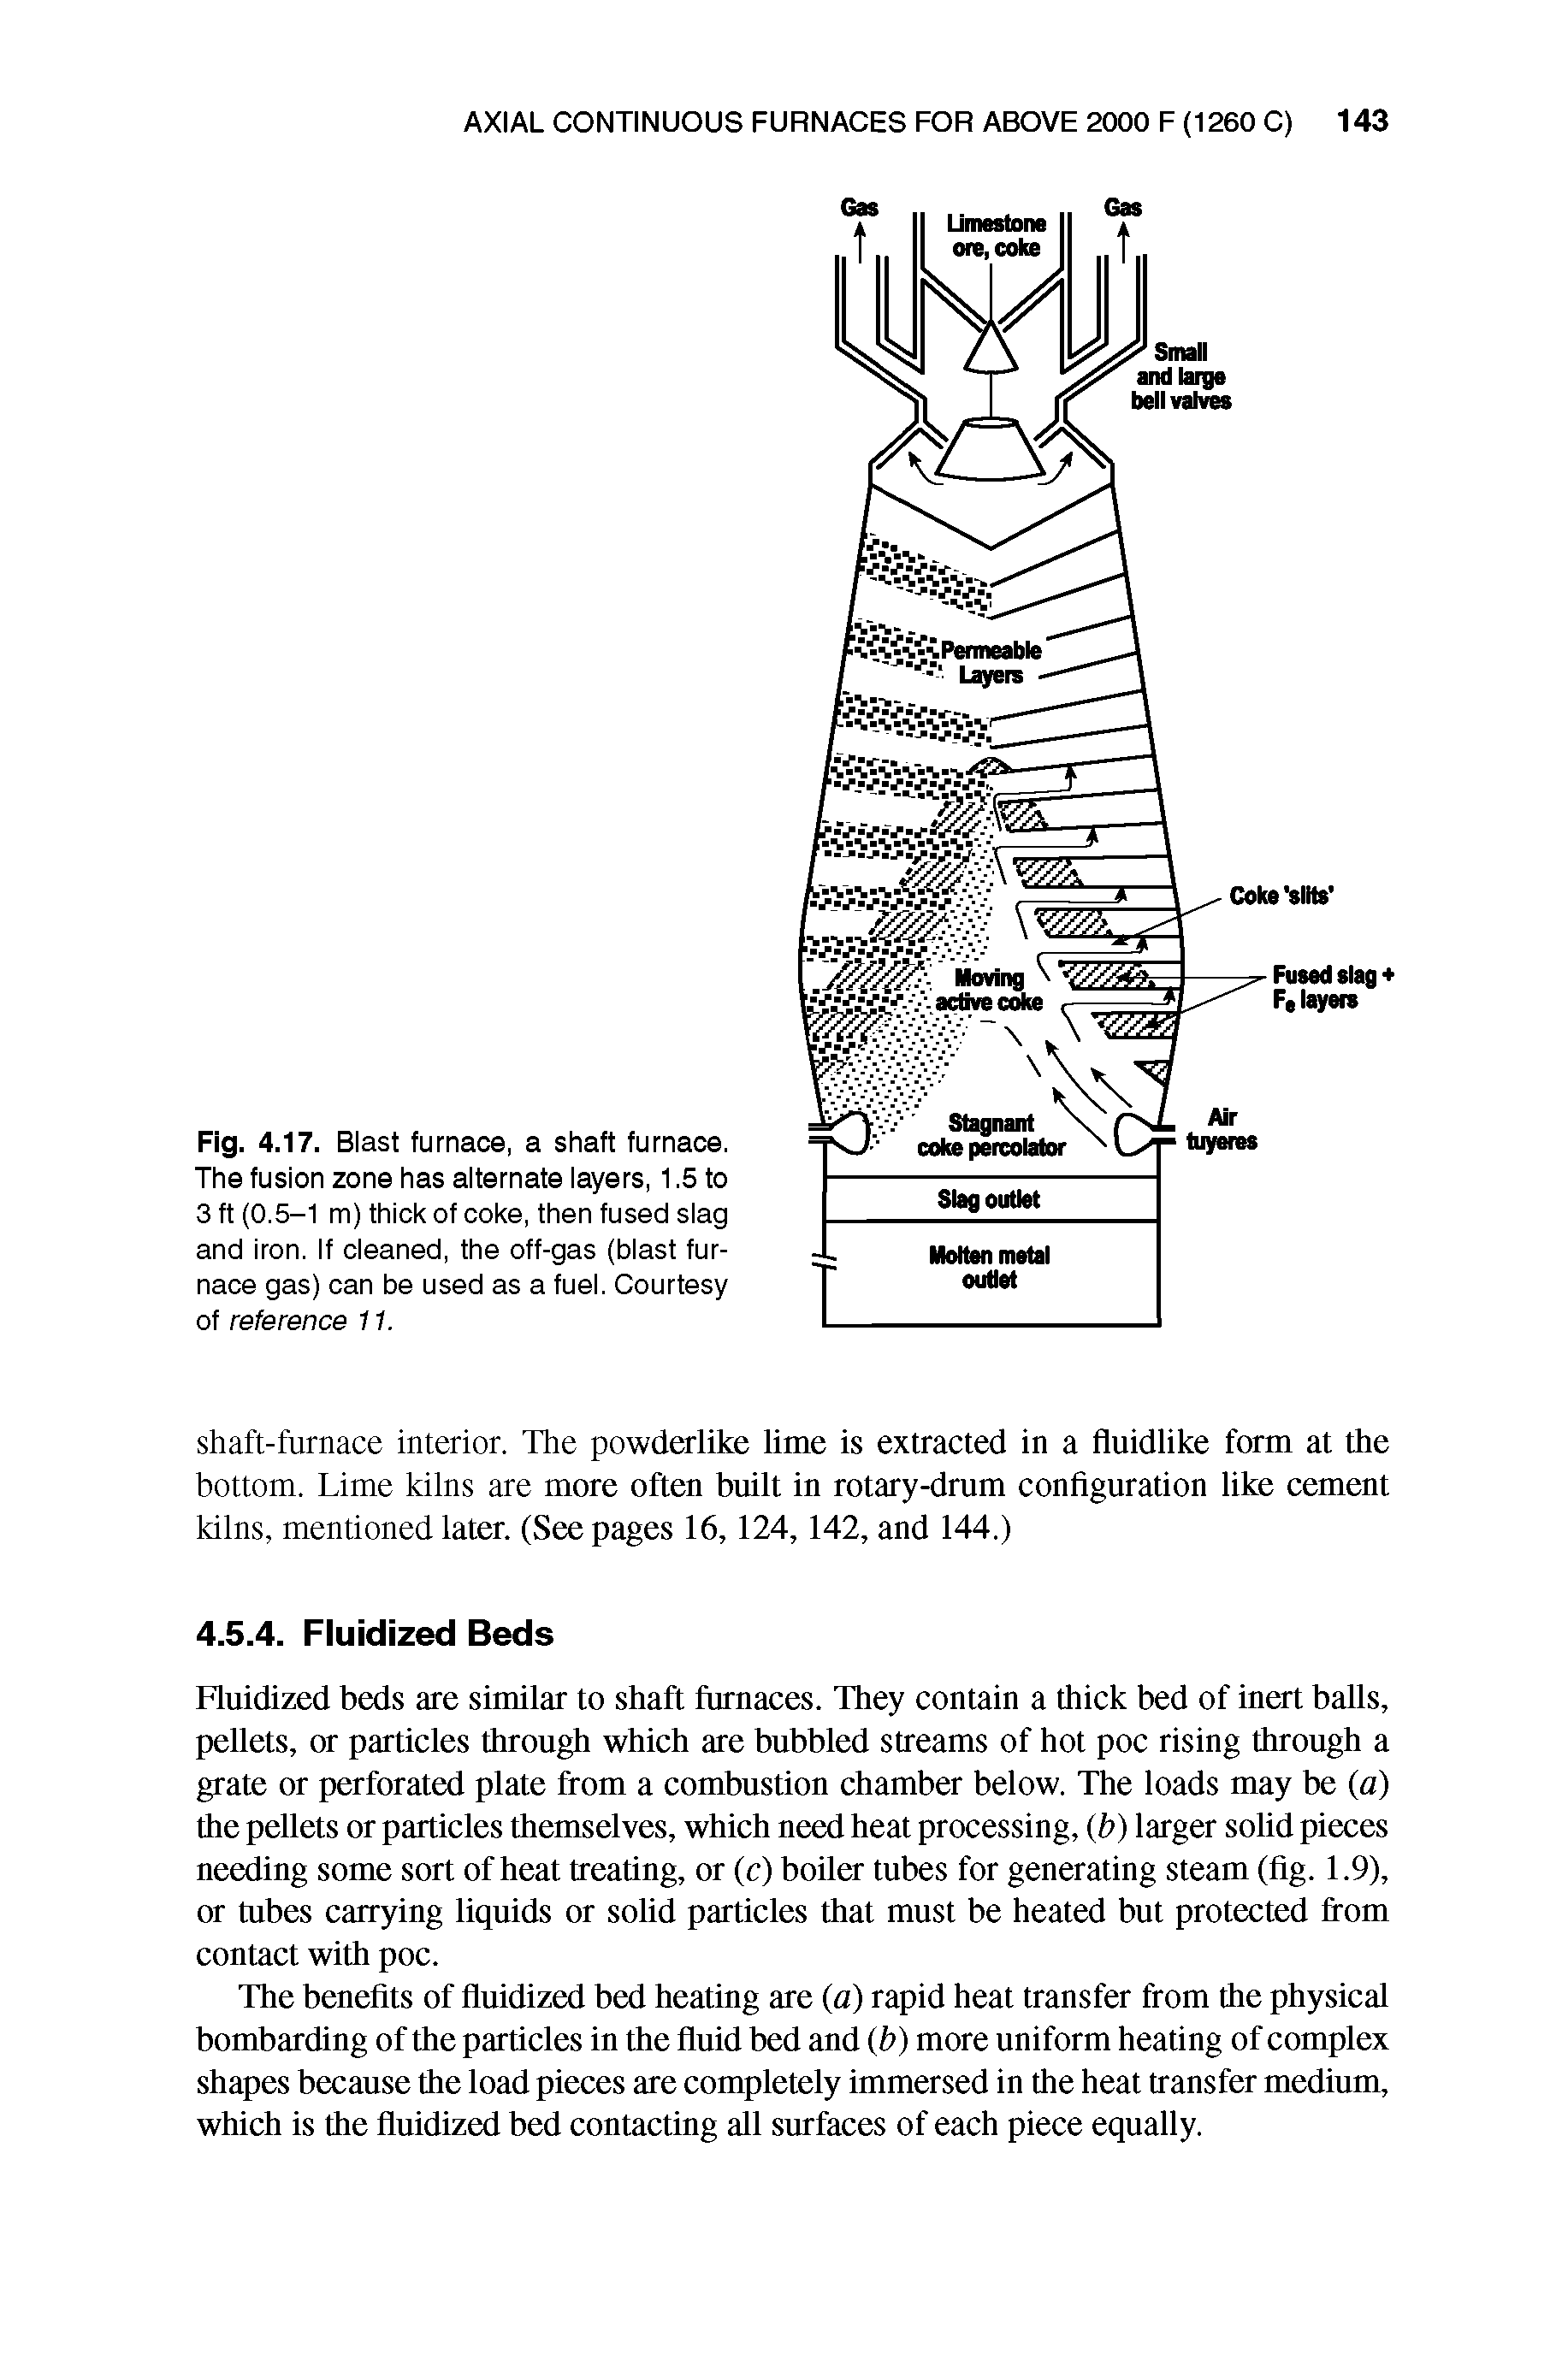 Fig. 4.17. Blast furnace, a shaft furnace. The fusion zone has alternate layers, 1.5 to 3 ft (0.5-1 m) thick of coke, then fused slag and iron. If cleaned, the off-gas (blast furnace gas) can be used as a fuel. Courtesy of reference 11.